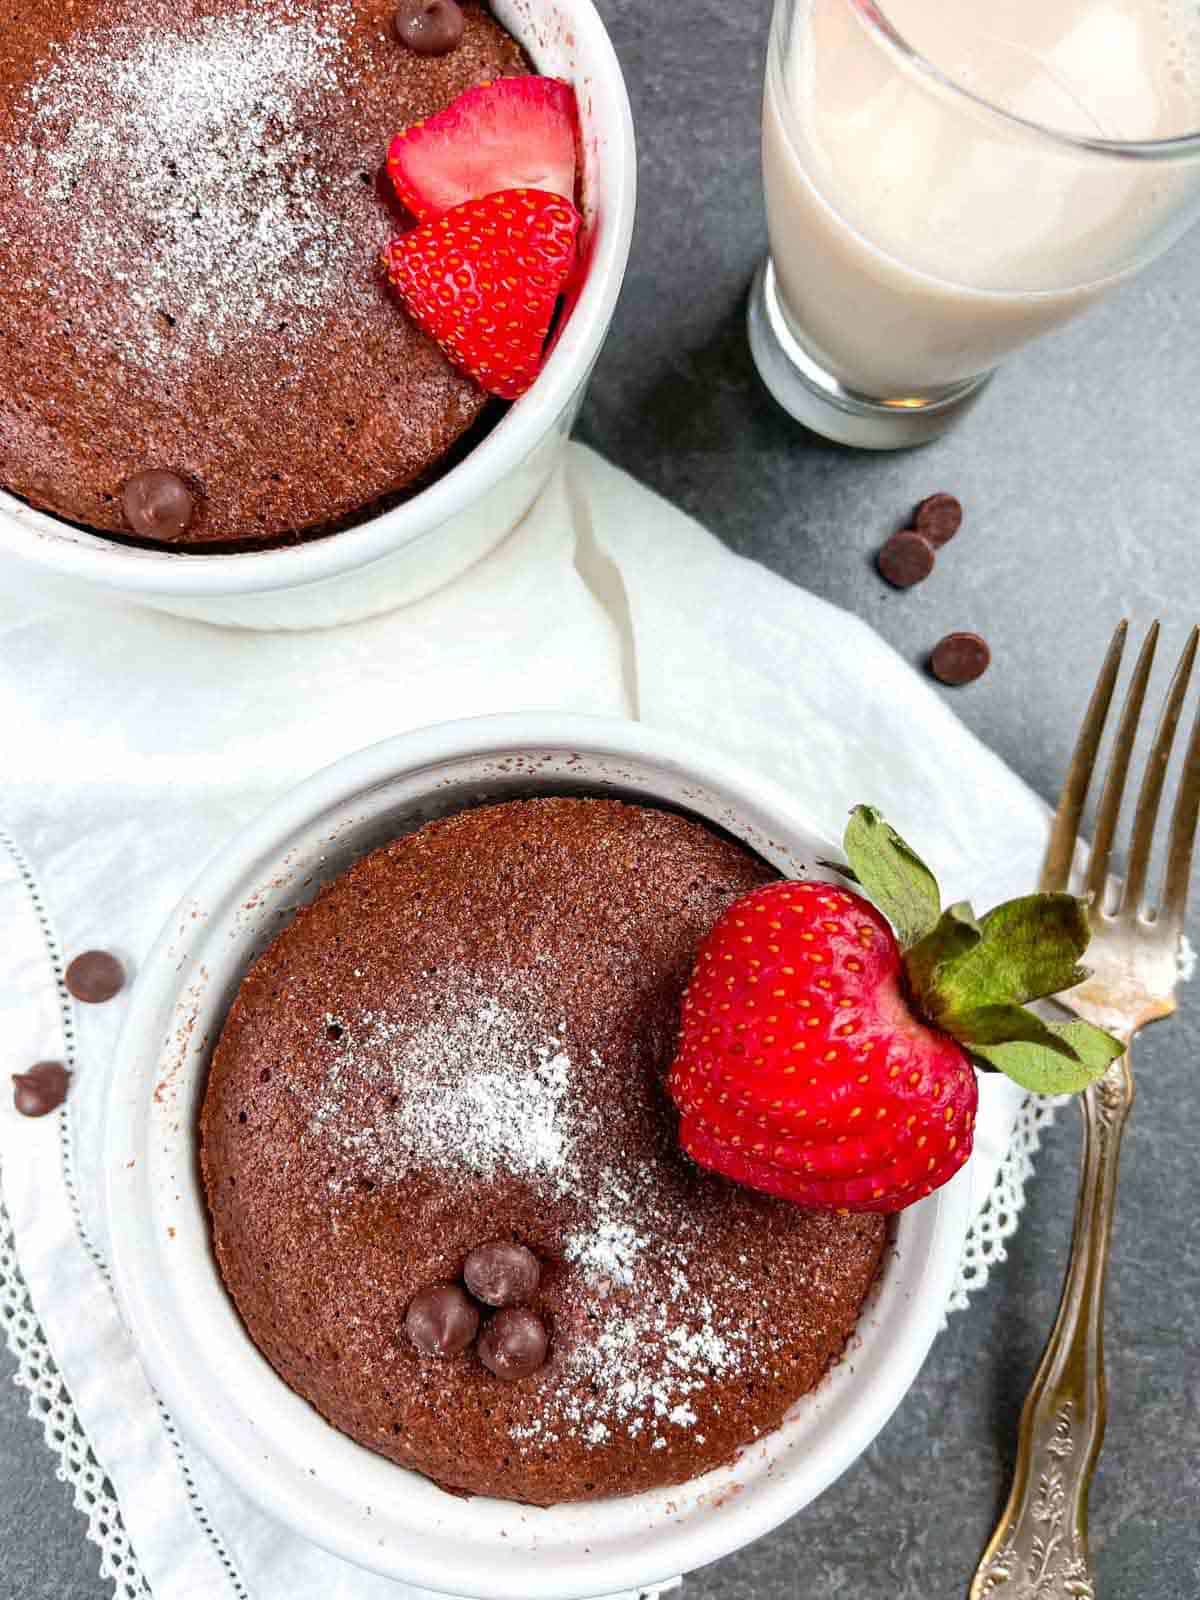 Two mug cakes in white ramekins with sliced strawberries and chocolate chips with a fork and a glass of milk.